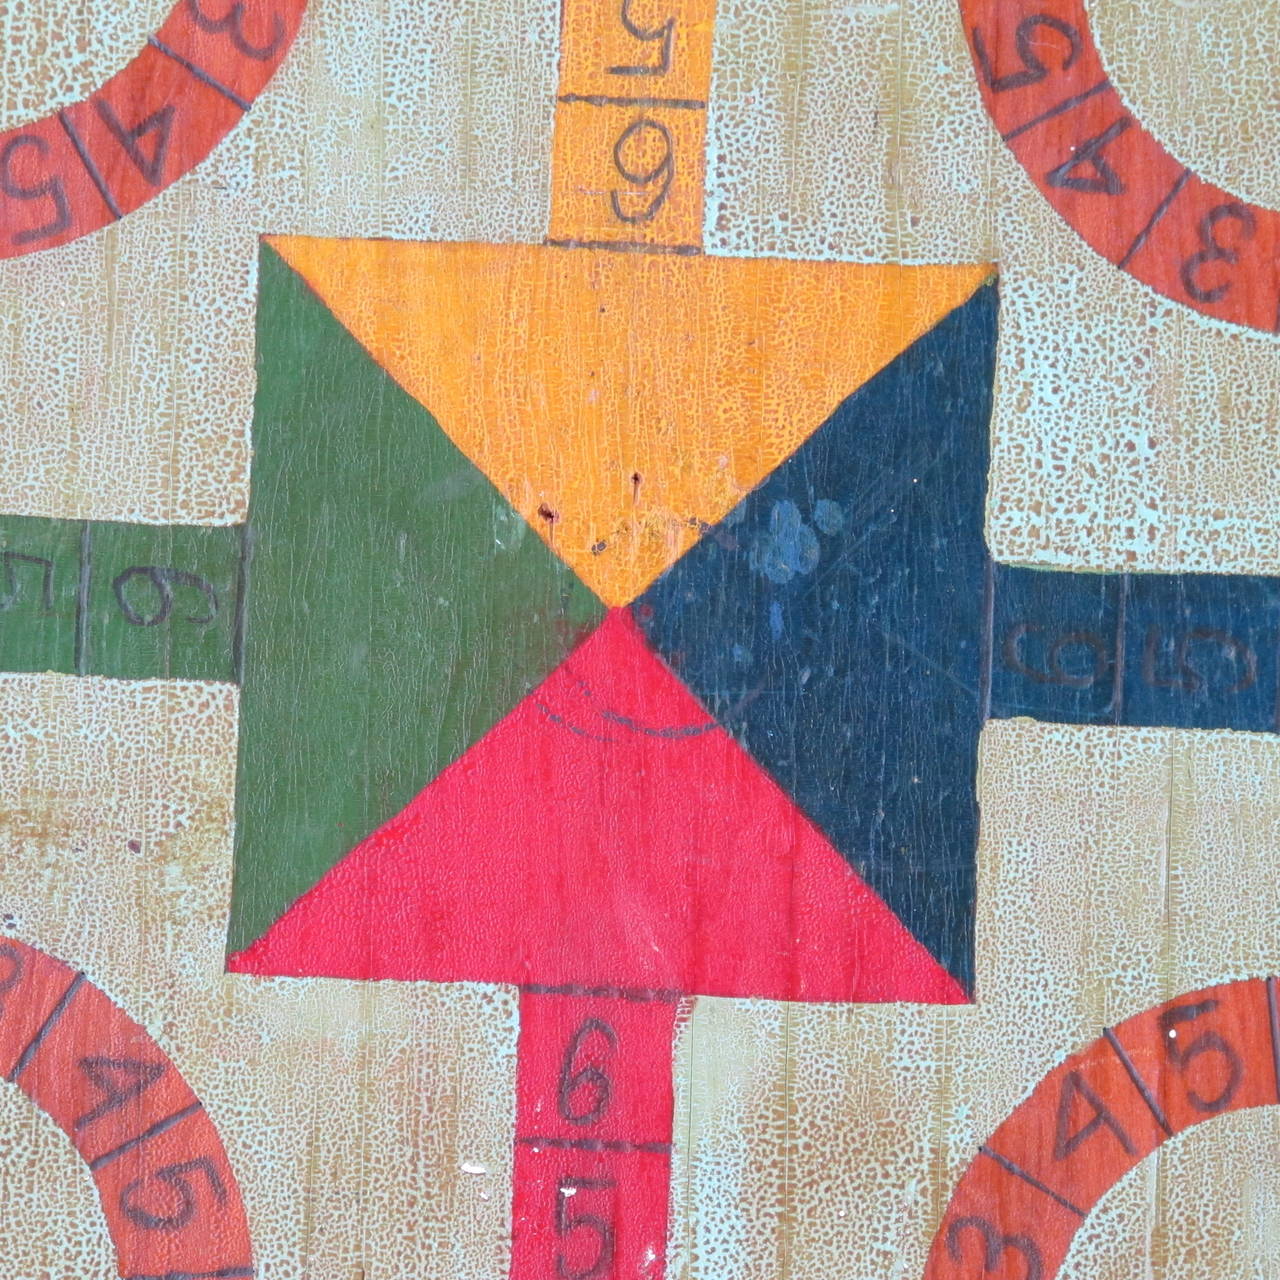 Gameboard with primary colors on wood panel. The game has the starter colors in the corners and a numbered trail around the board.